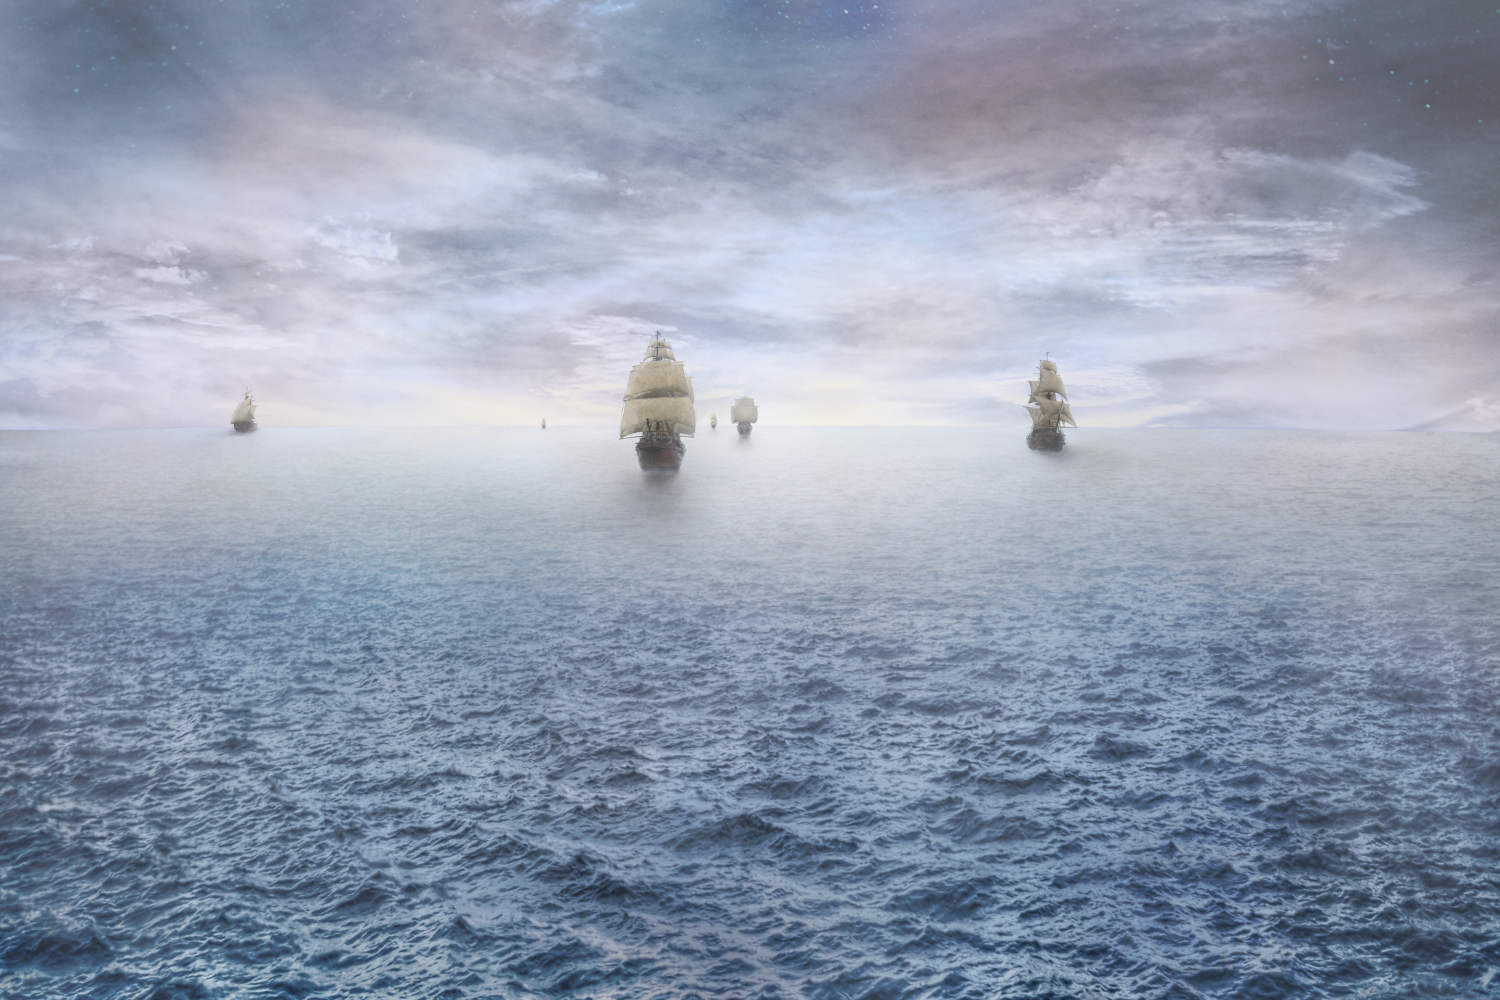 fleet of distant wooden sailing ships at sea